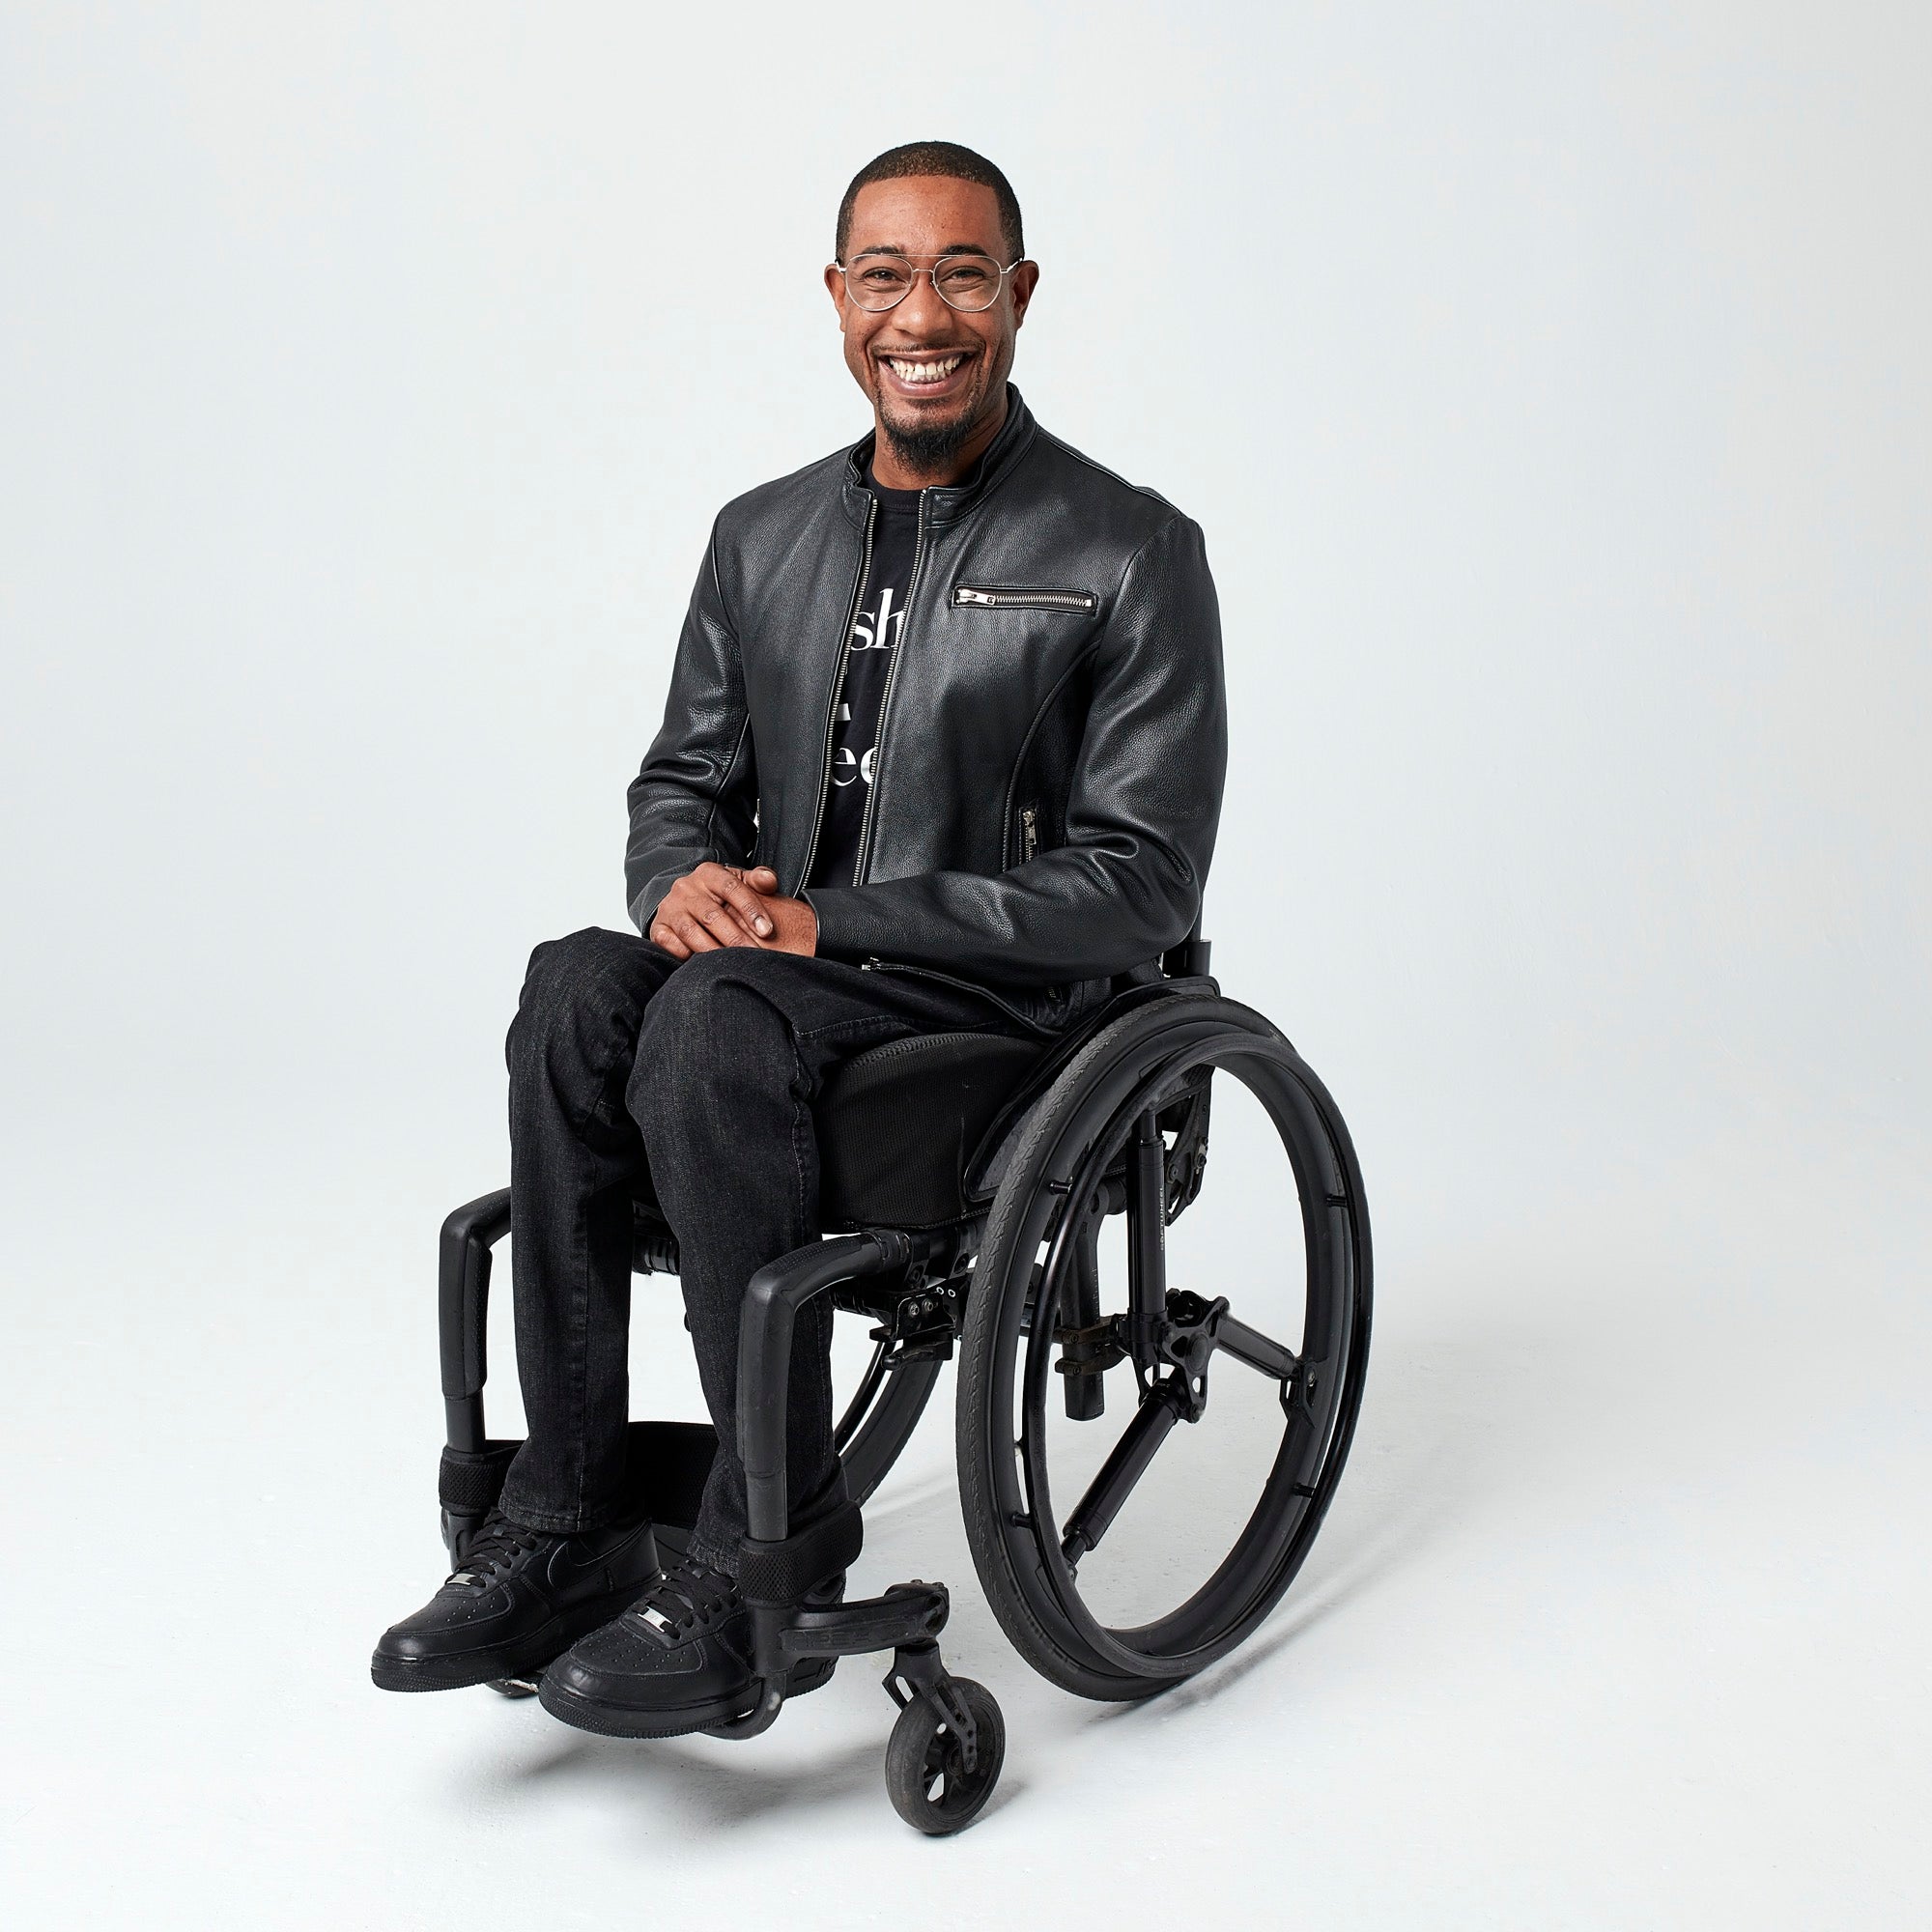 Adaptive clothing for women and men that is stylish and functional